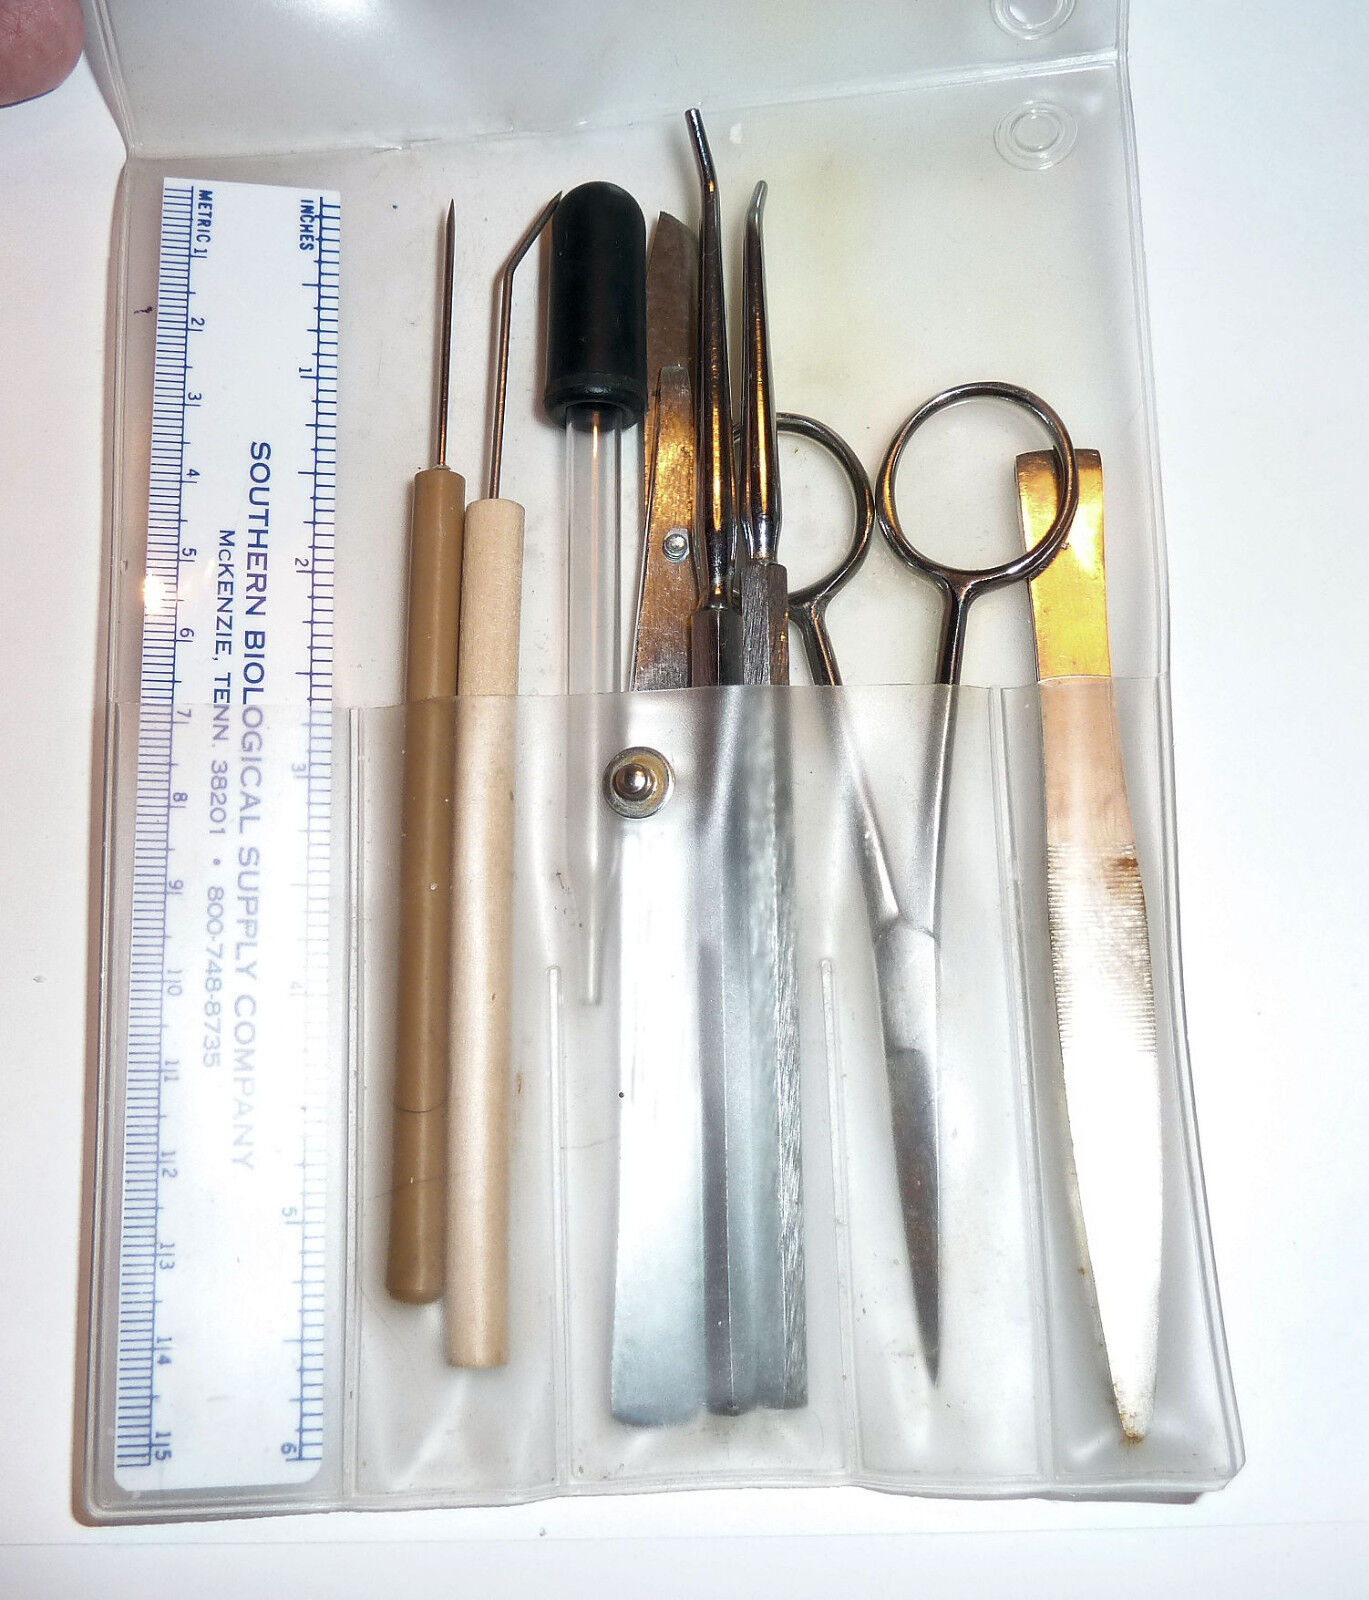 Dissection KIT In Vinyl Holder Southern Biological Supply Co. McKenzie Tennessee